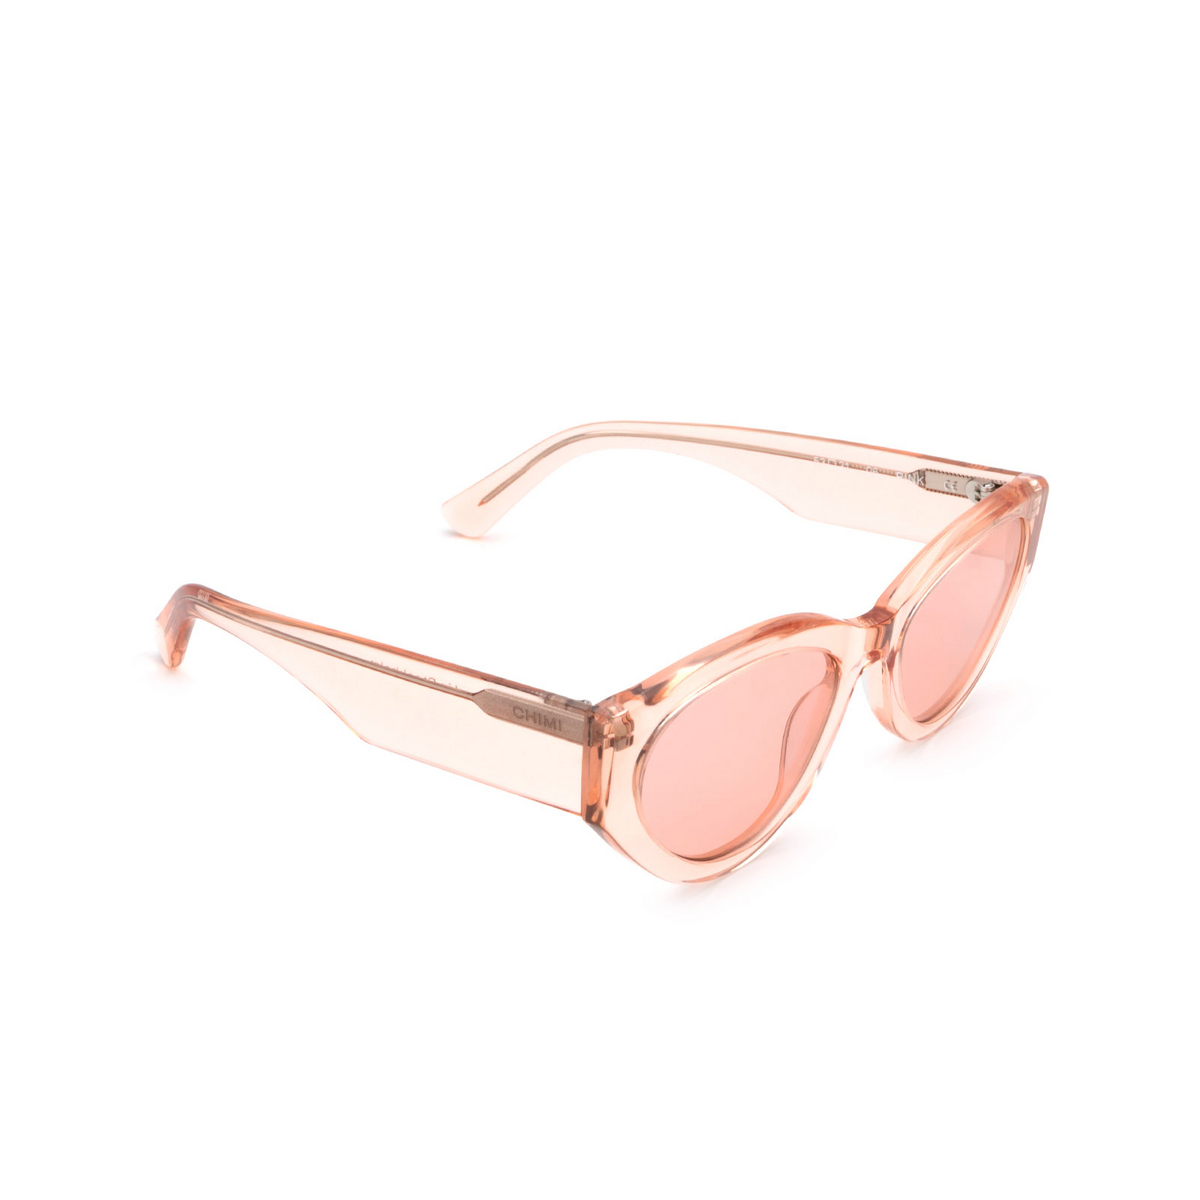 Chimi® Cat-eye Sunglasses: 06 color Pink - three-quarters view.